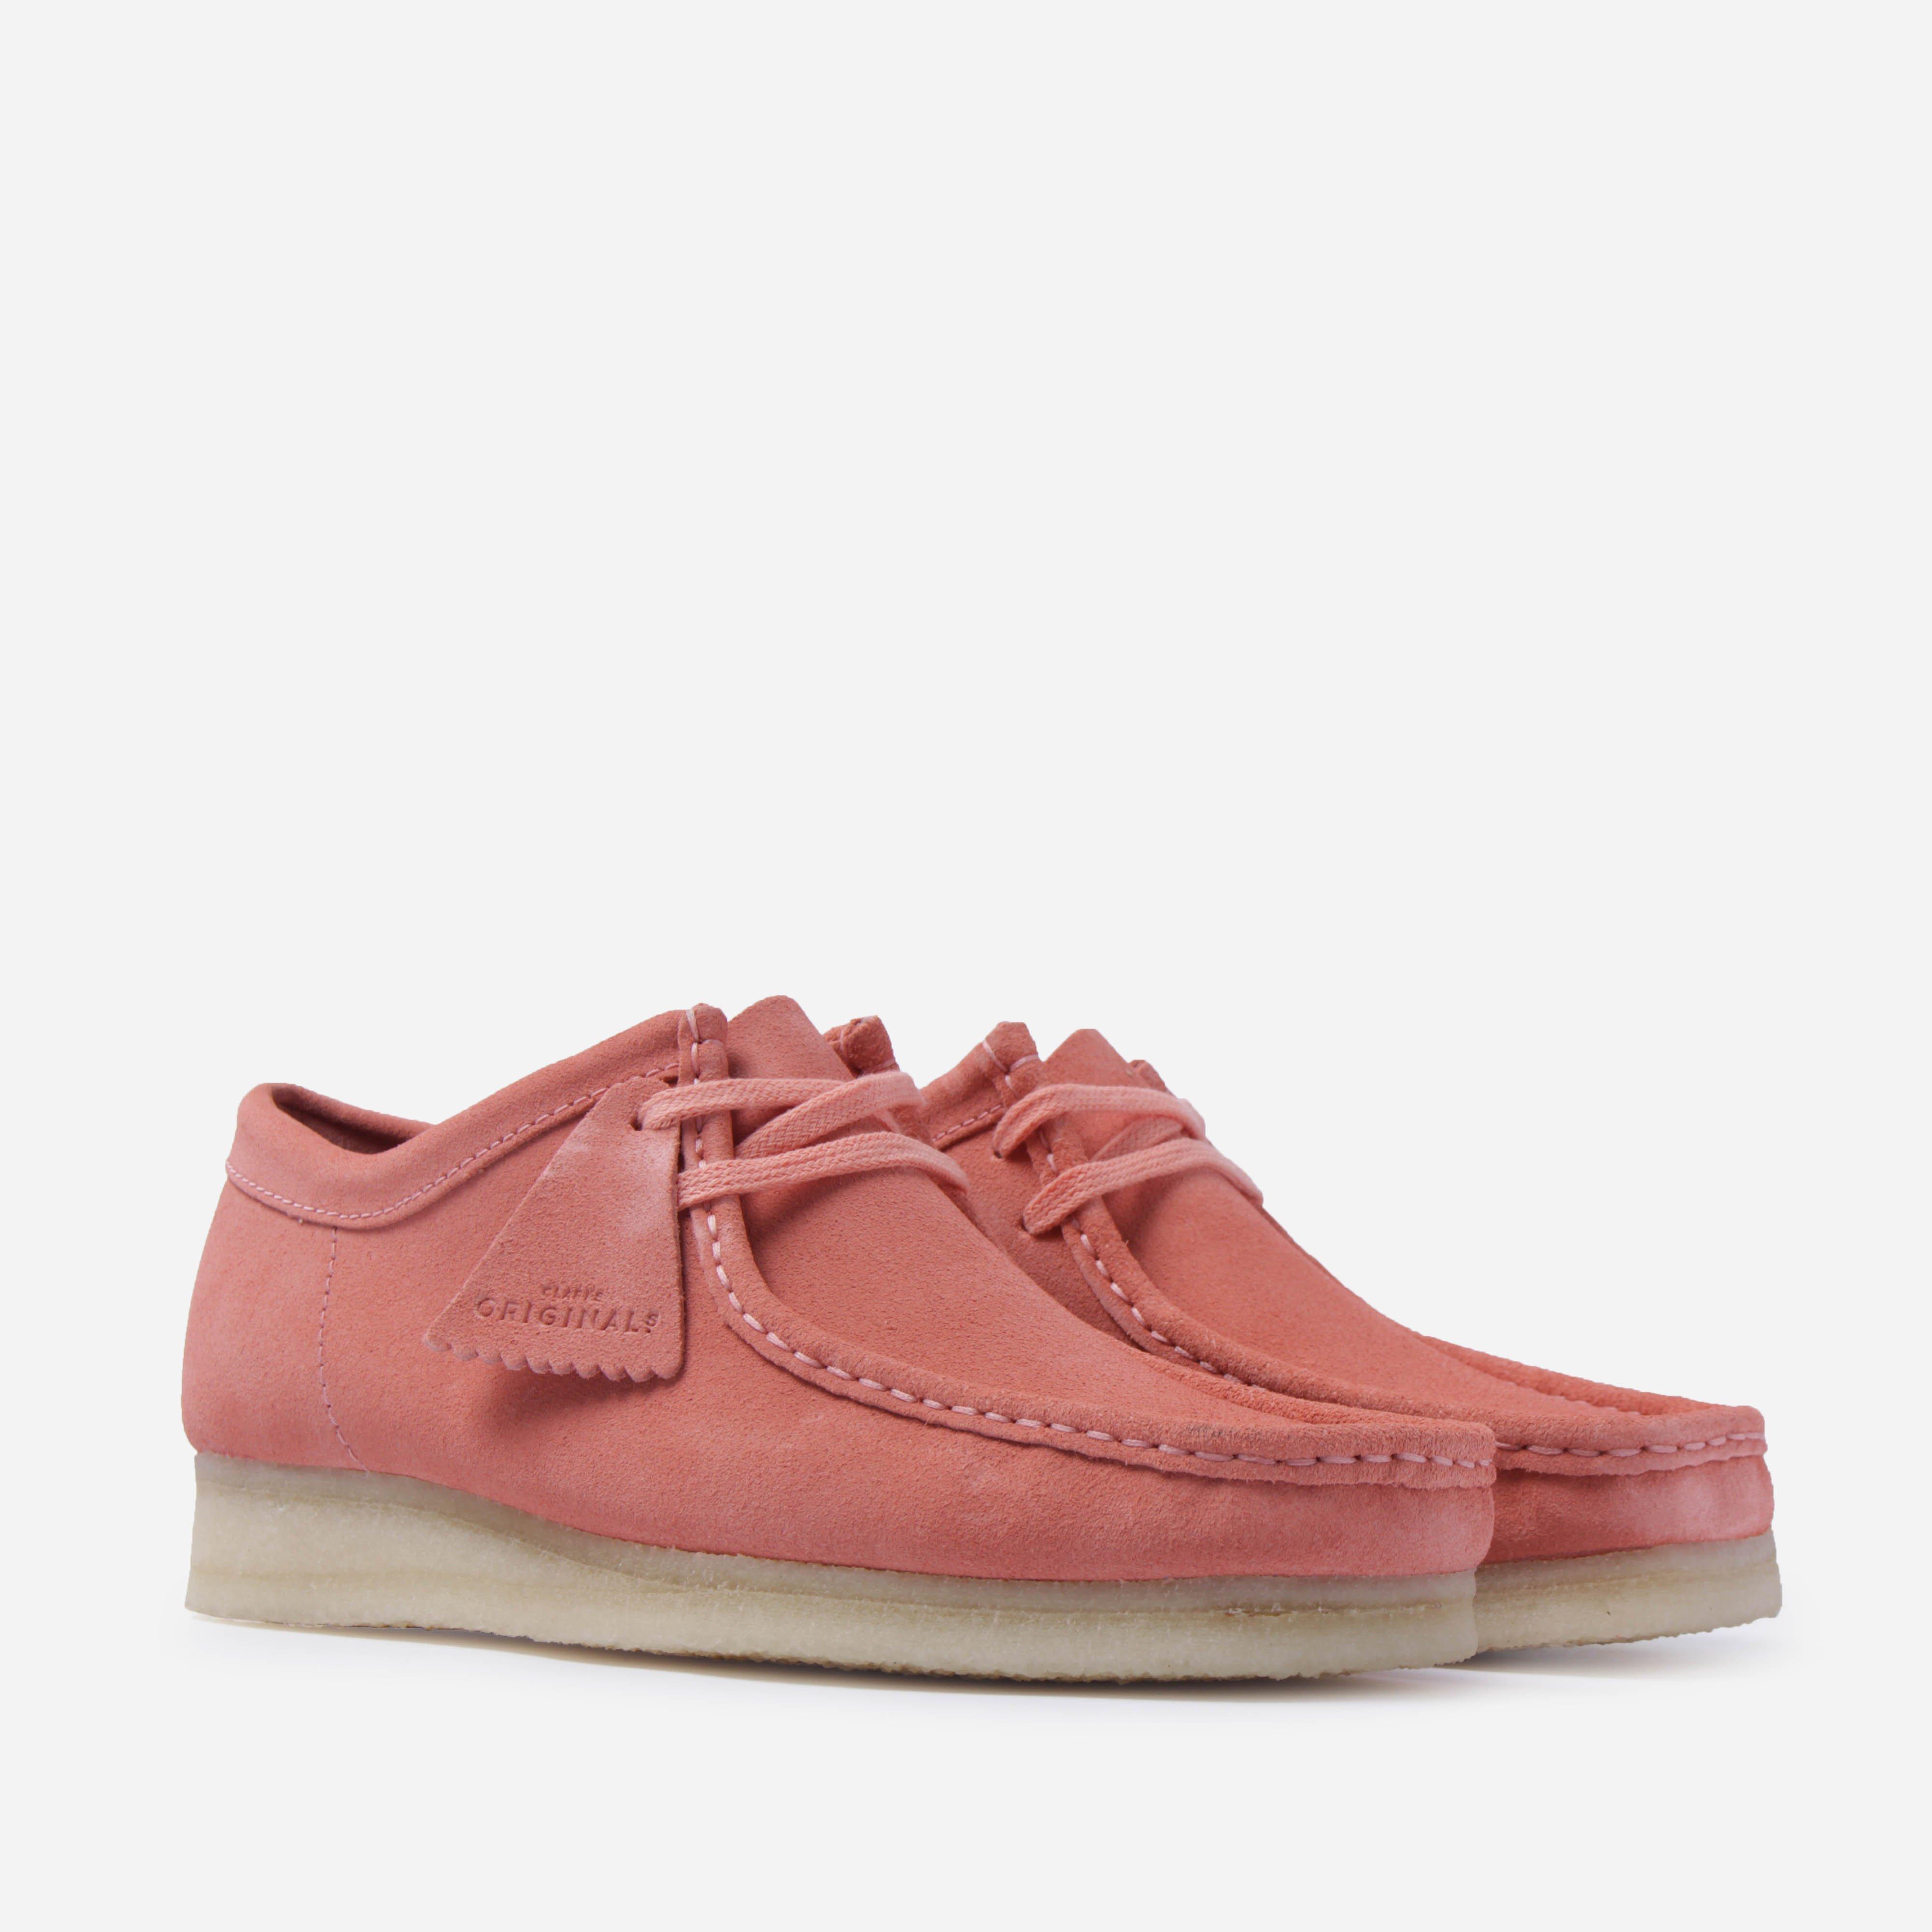 Clarks Wallabee in Bright Pink Suede (Pink) for Men - Lyst